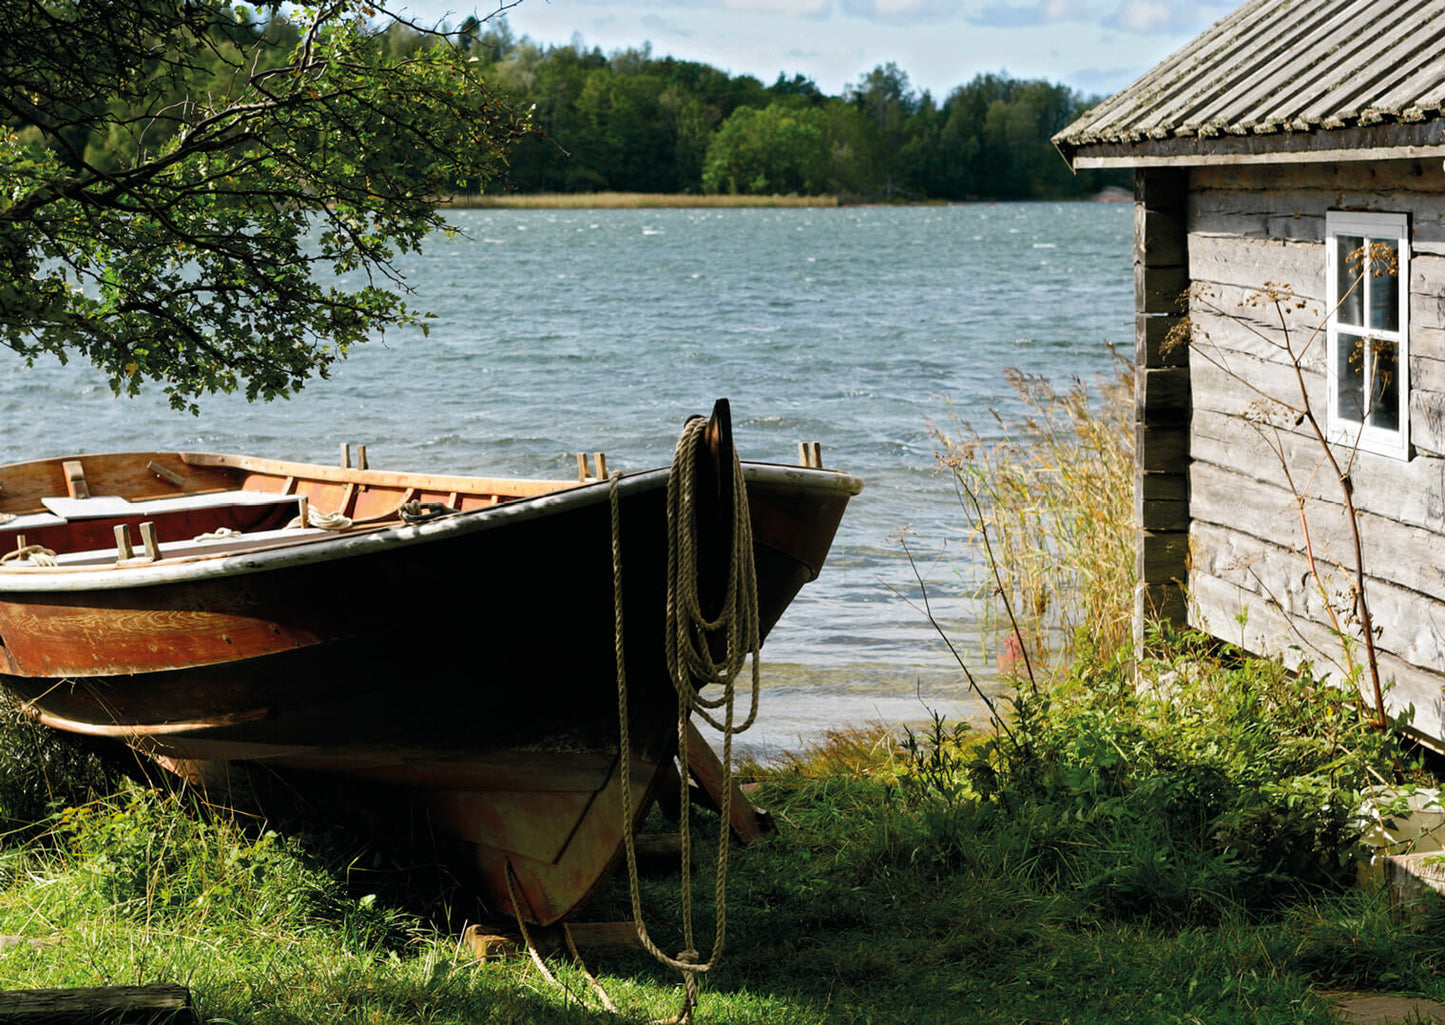 Wooden boat at boat-house